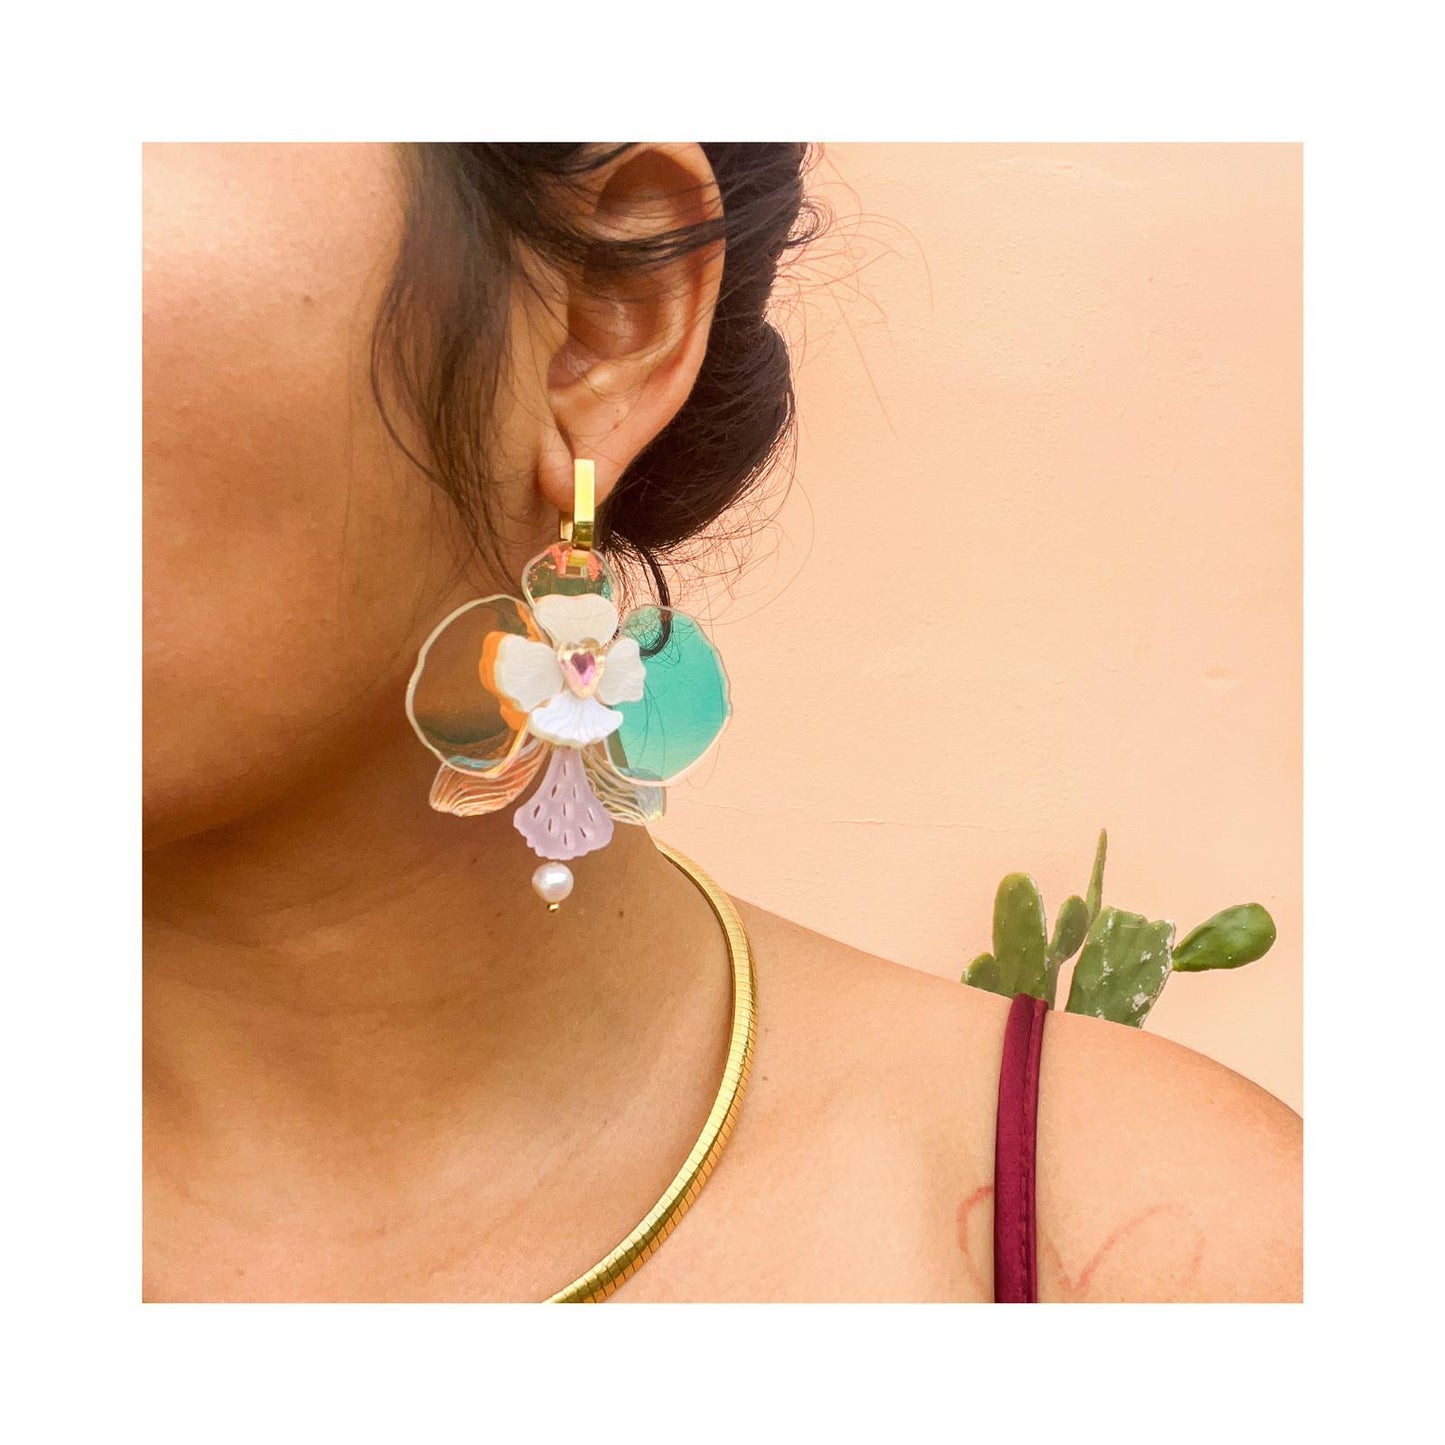 Orchid Earrings by Hola Forastera